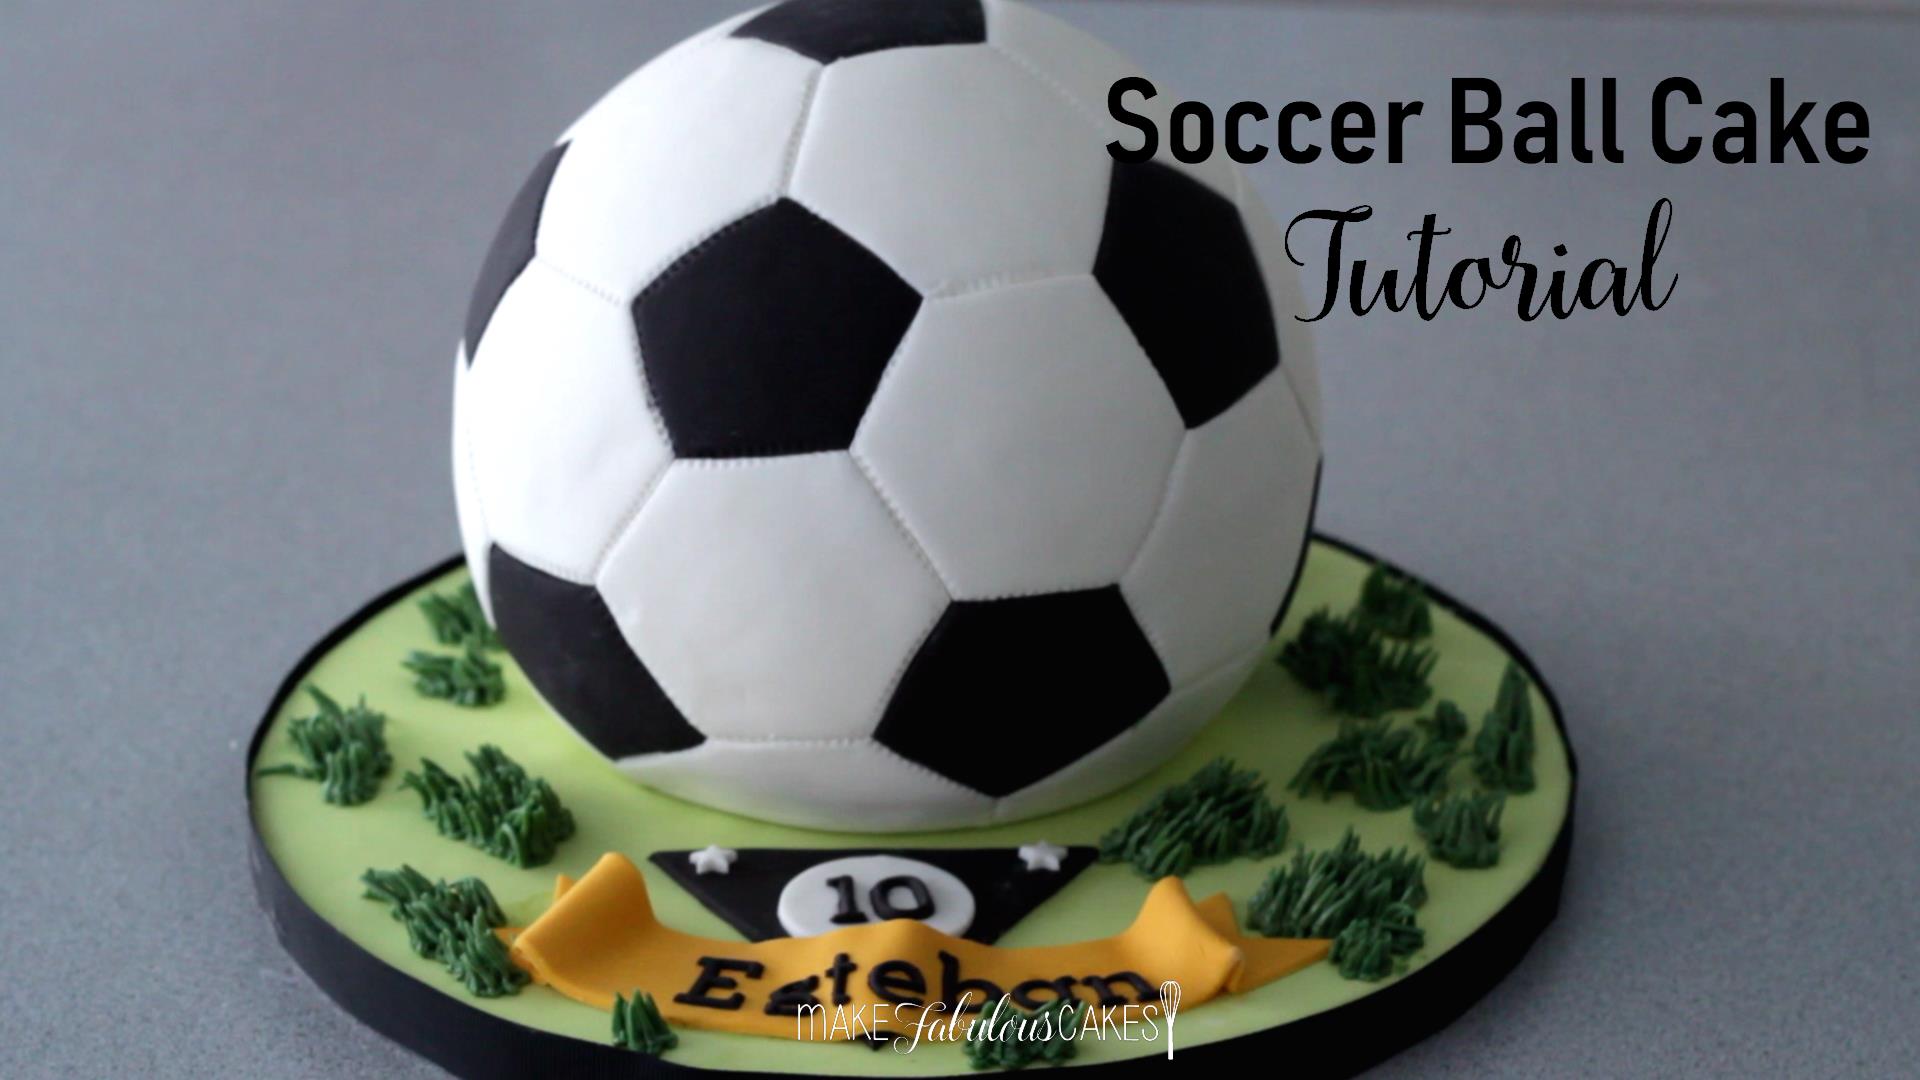 Basket Ball egg-less cake delivery in Delhi and Noida